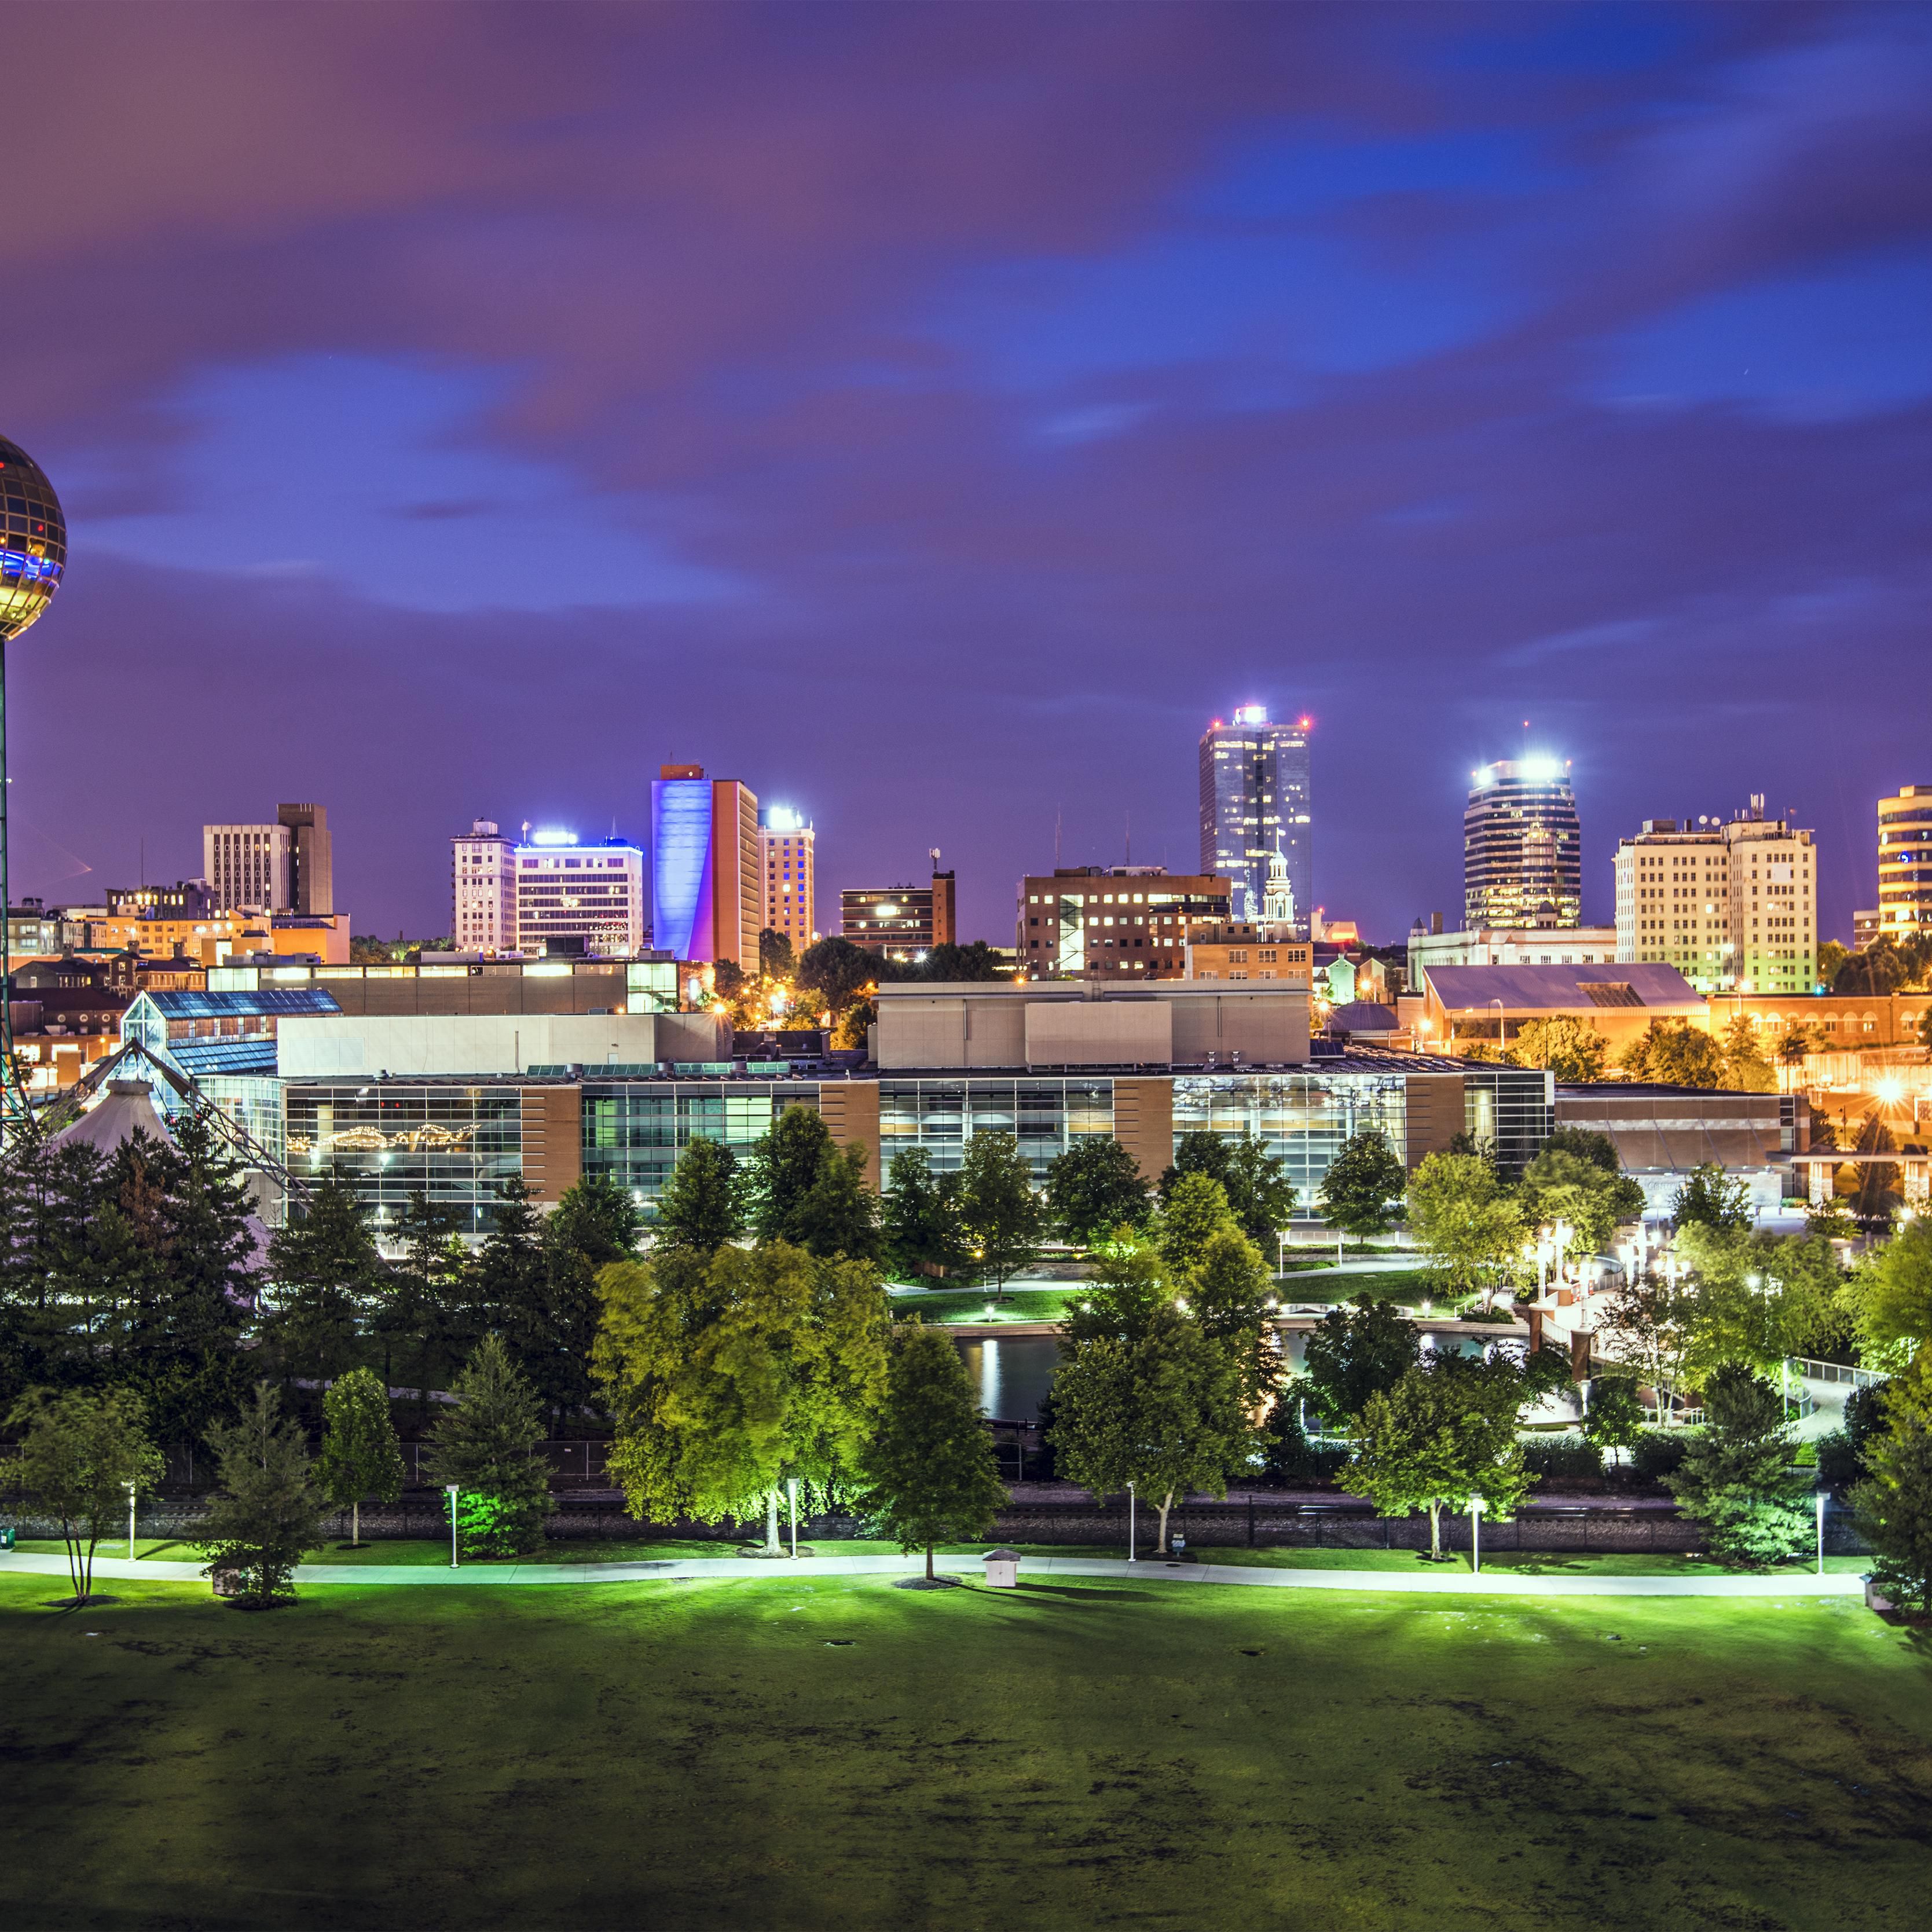 Explore everything there is to do in Downtown Knoxville.